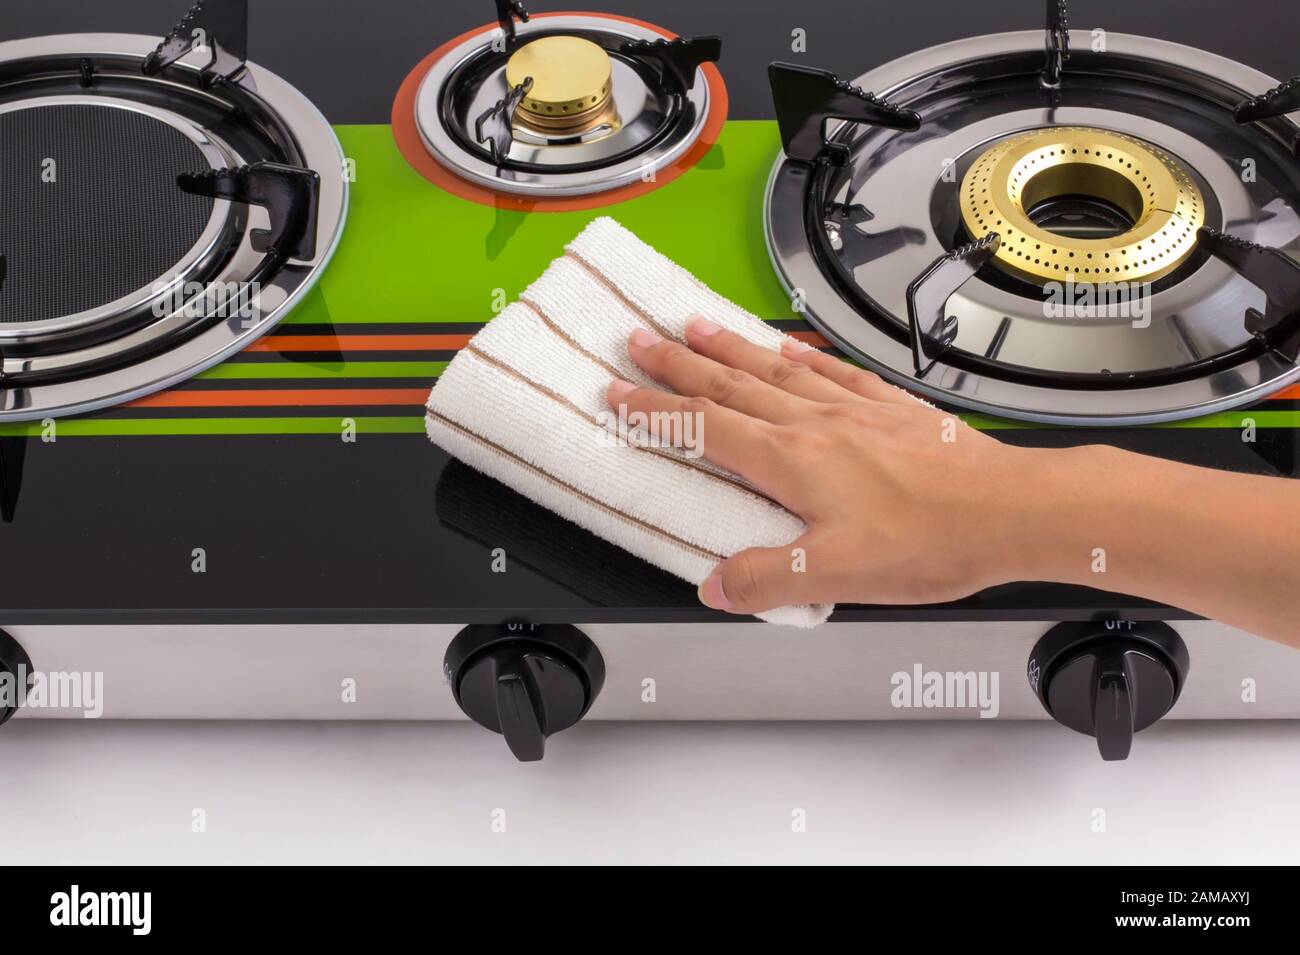 image of housewife hand cleaning gas stove Stock Photo